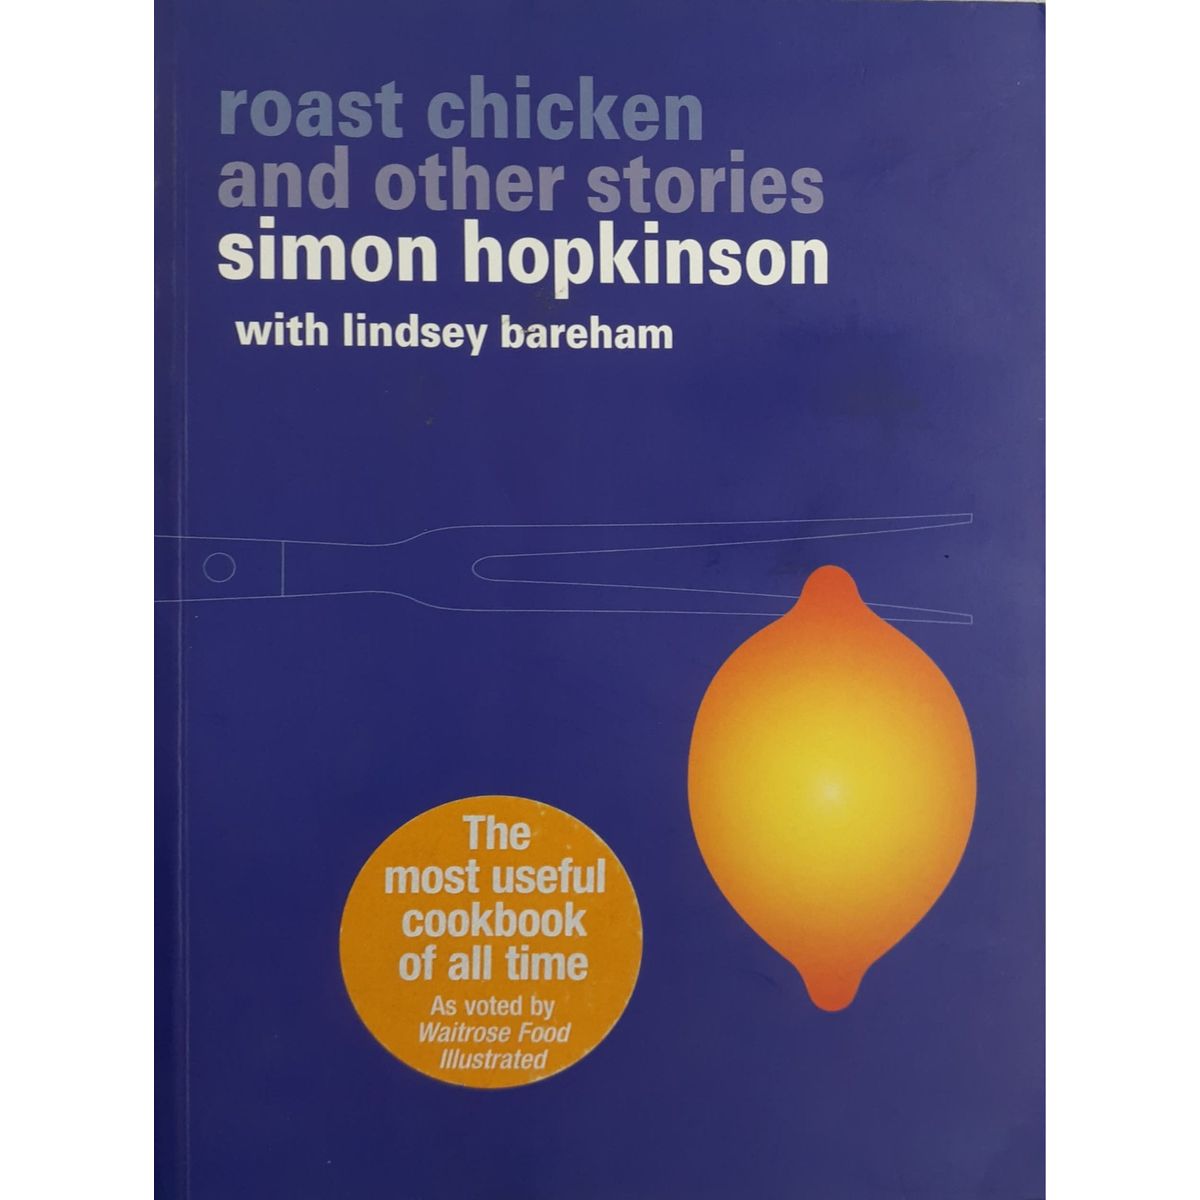 ISBN: 9780091871000 / 009187100X - Roast Chicken and Other Stories by Simon Hopkinson & Lindsey Bareham [1999]